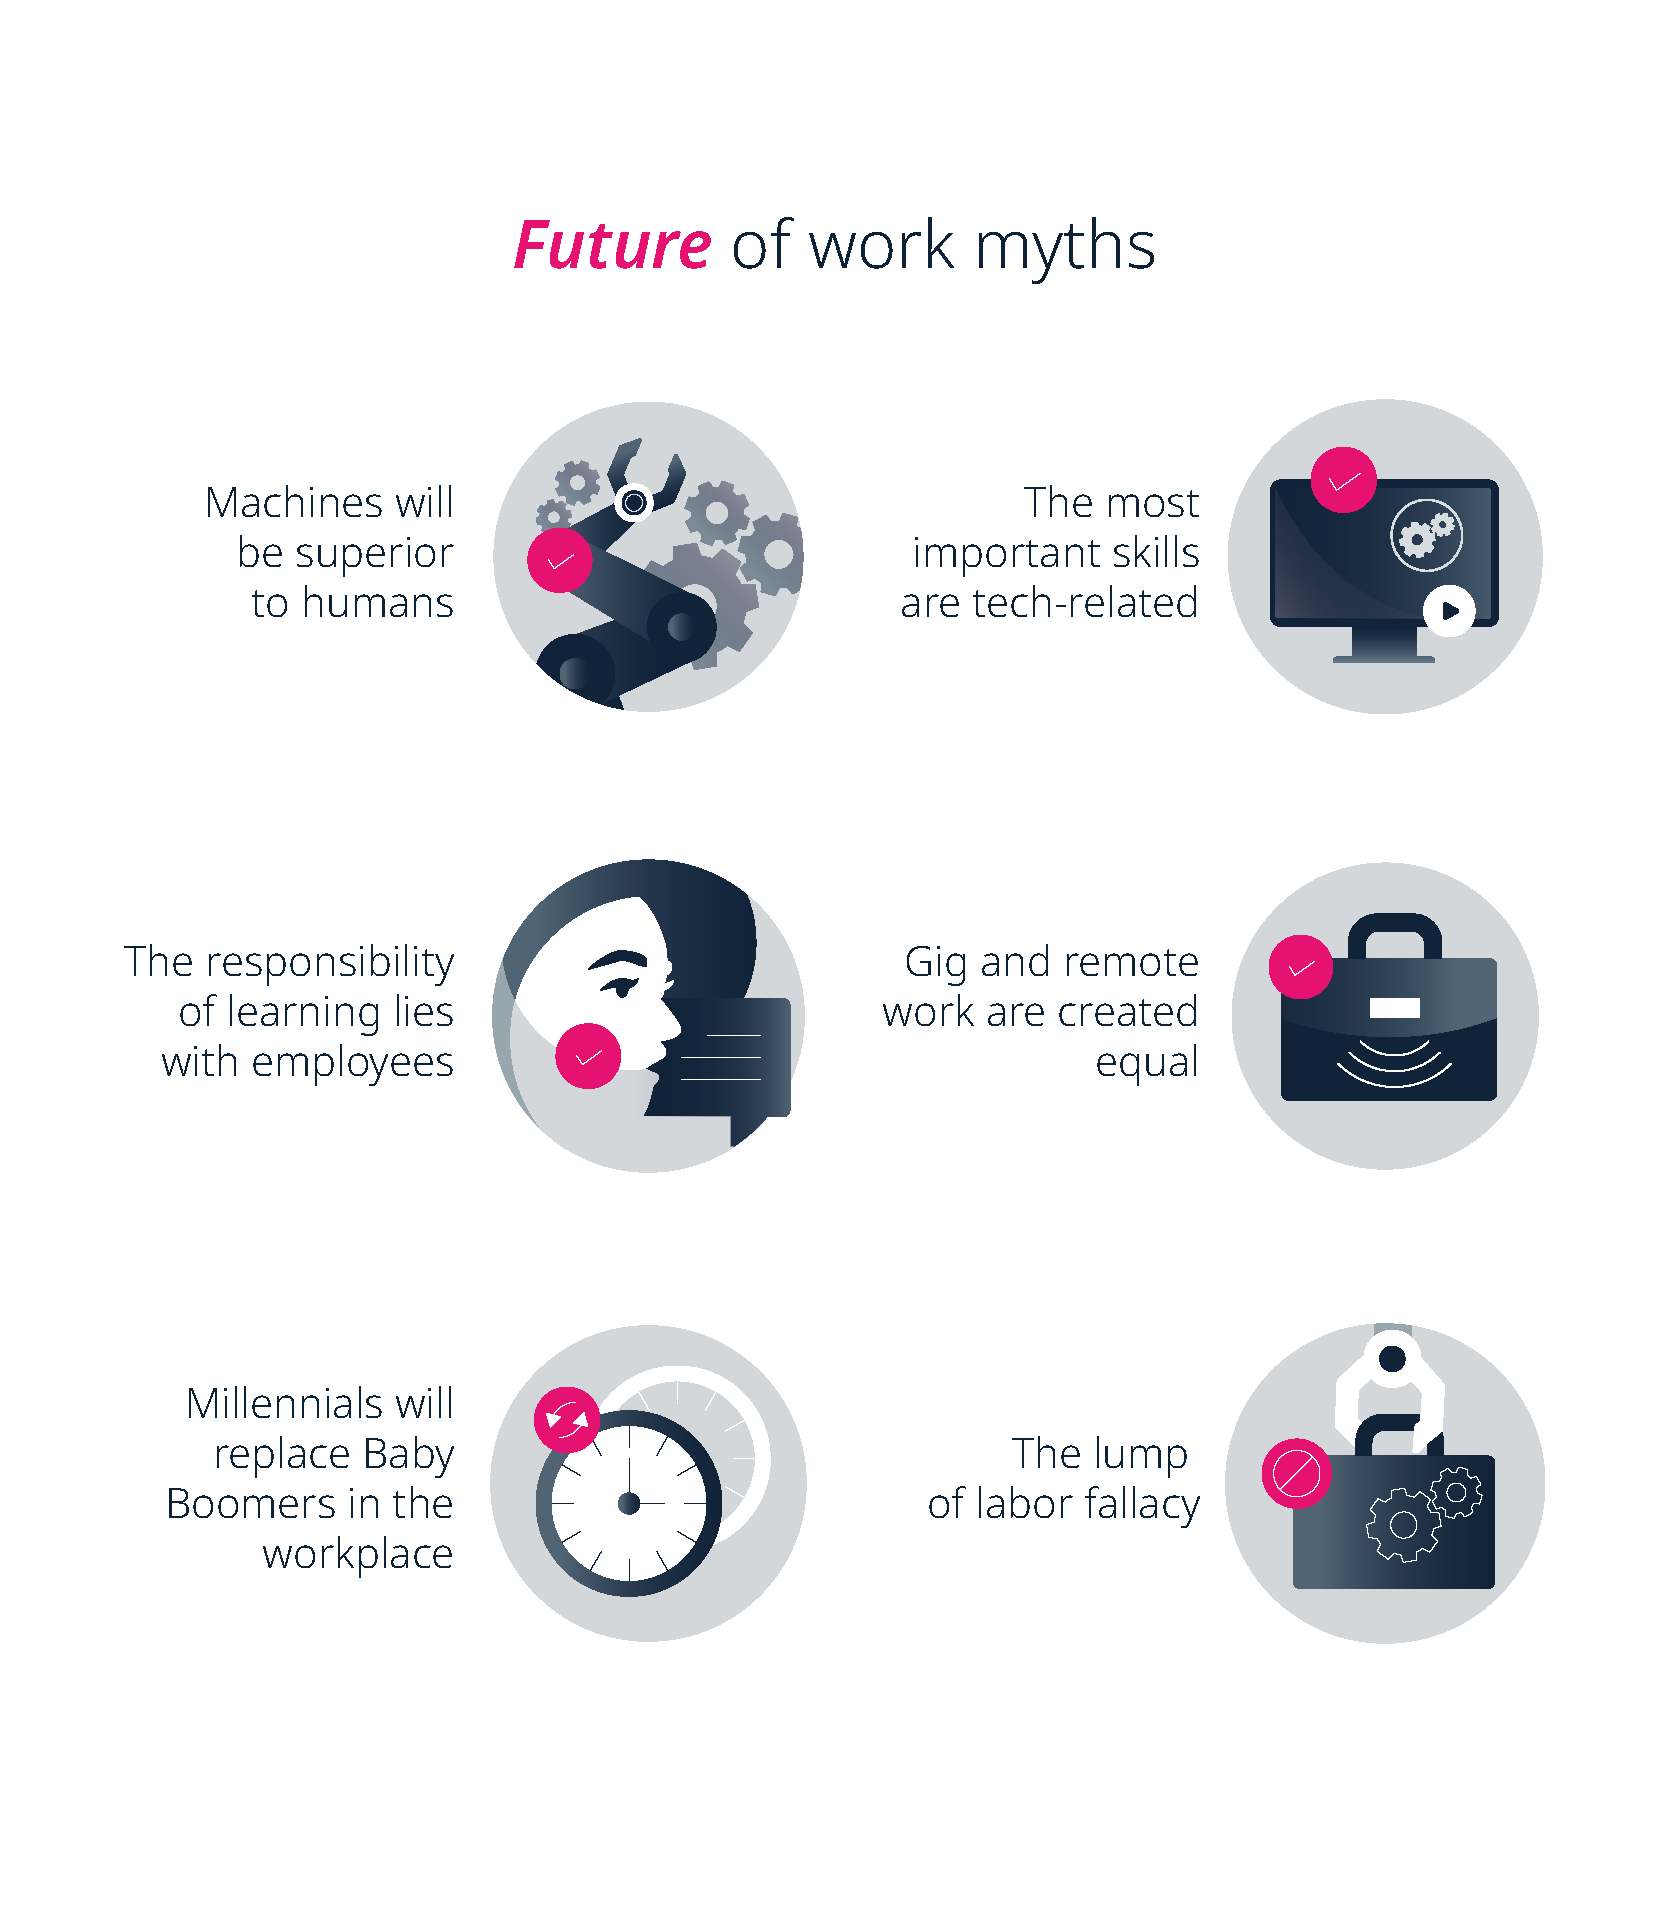 Myths about the future of work